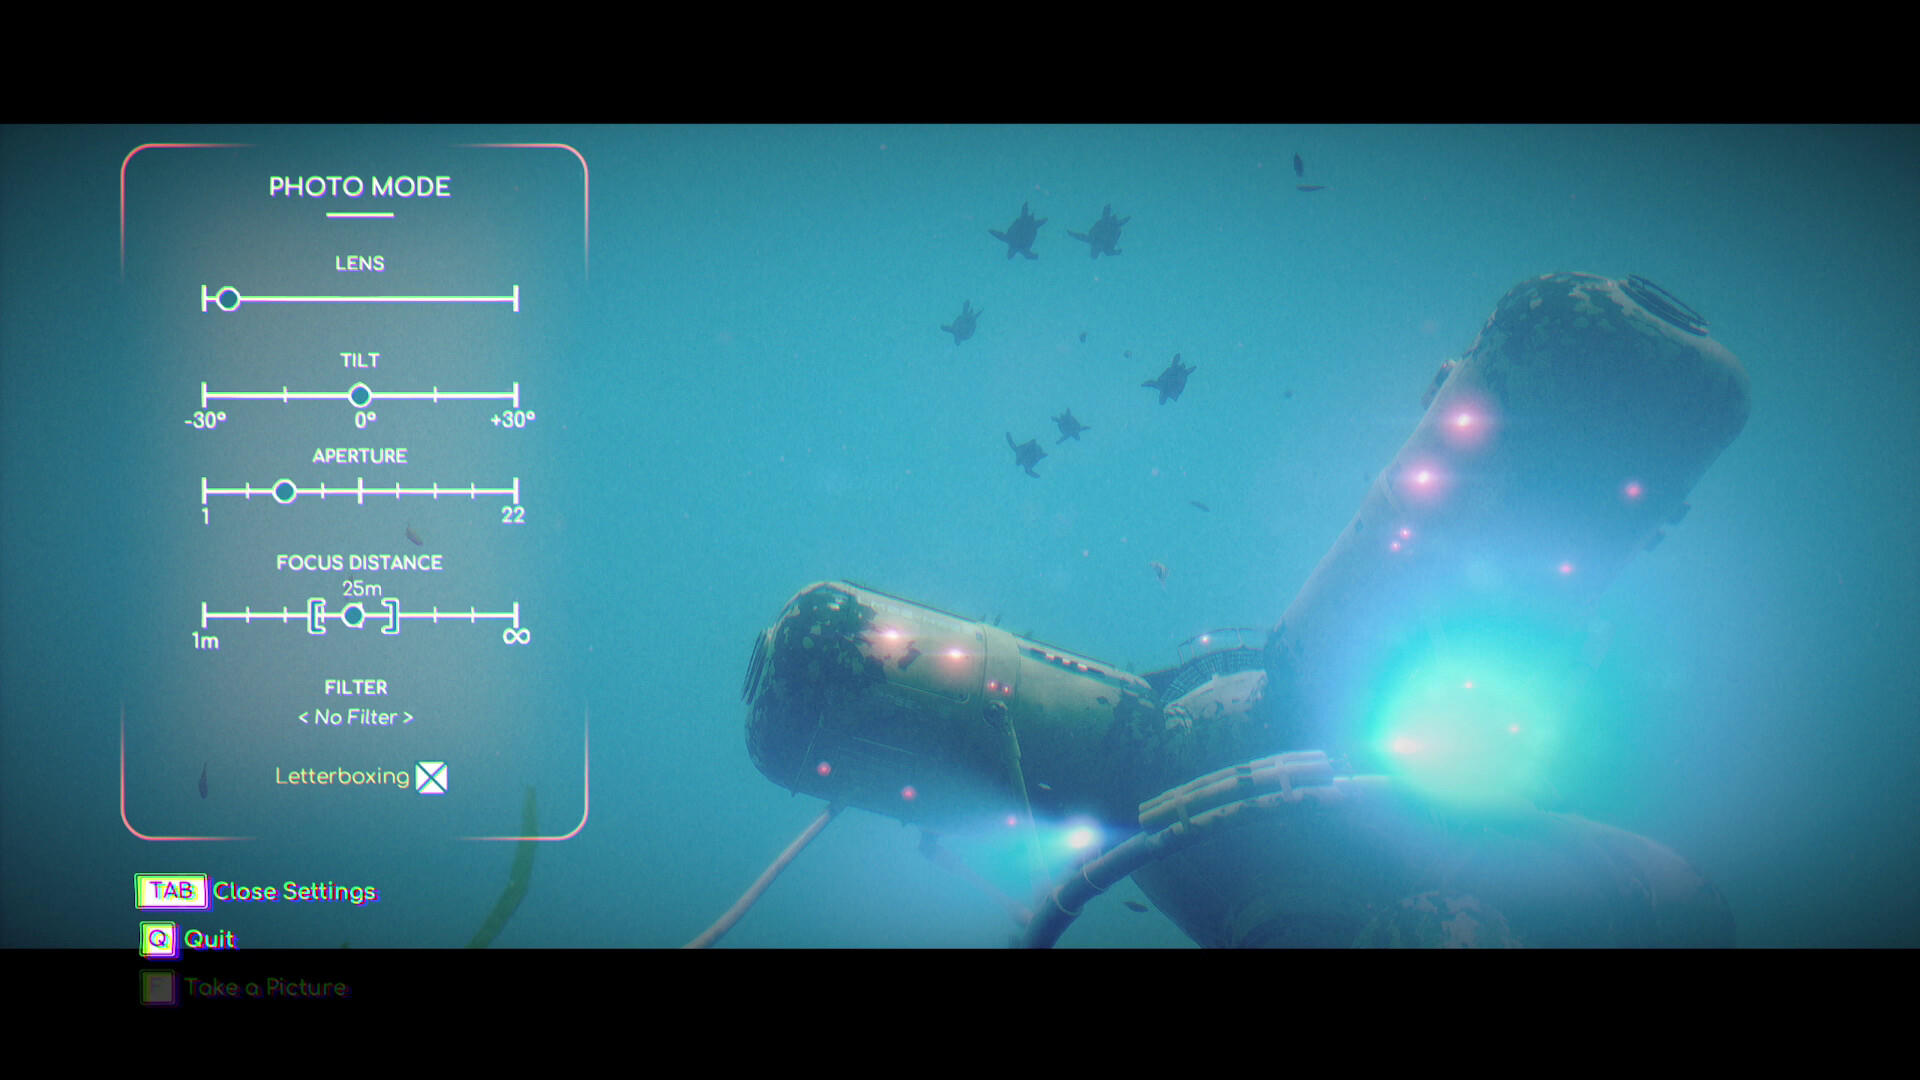 Under The Waves screenshot game